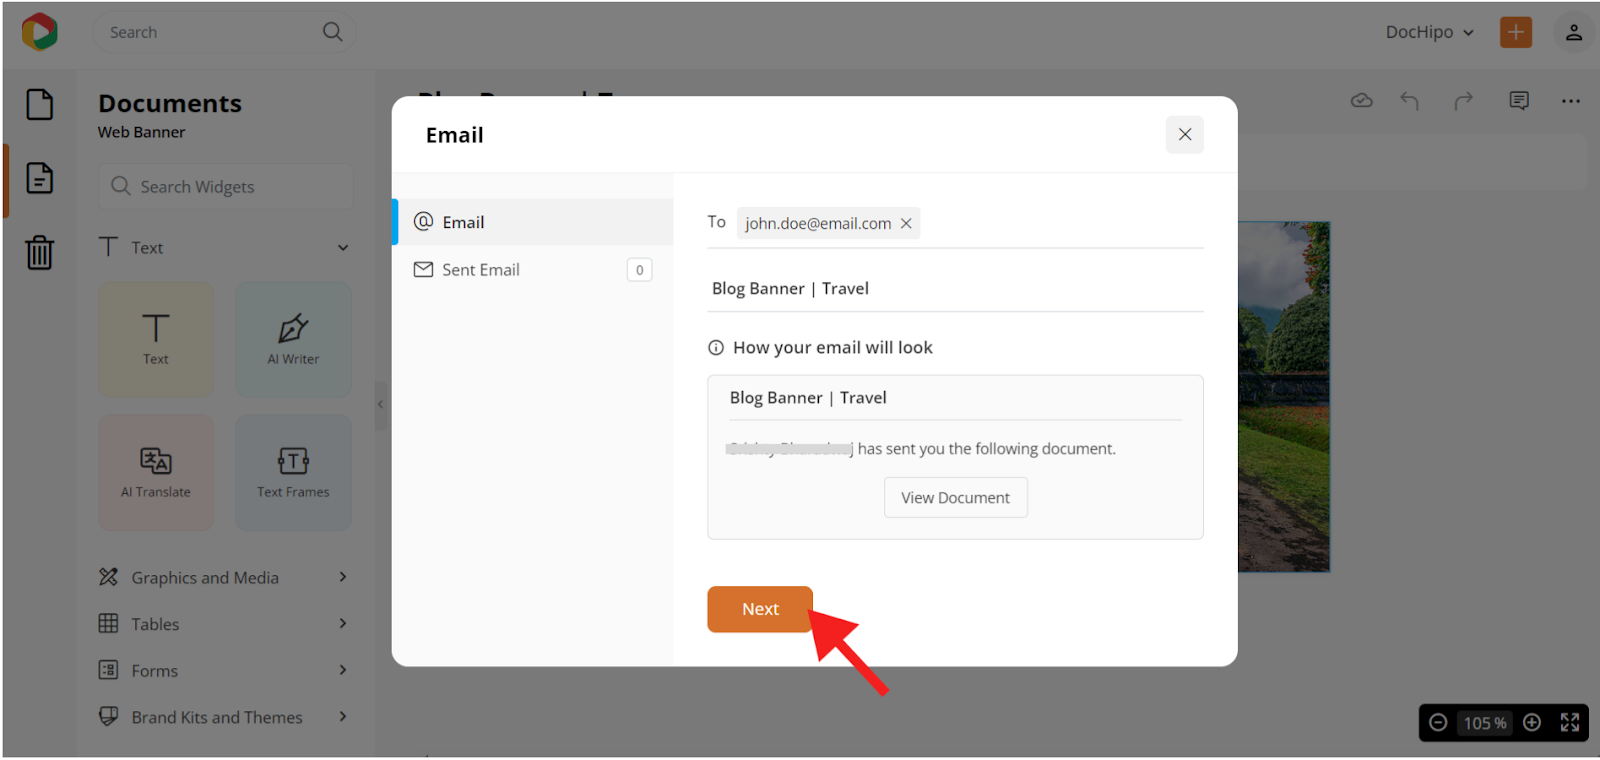 email sharing options in DocHipo